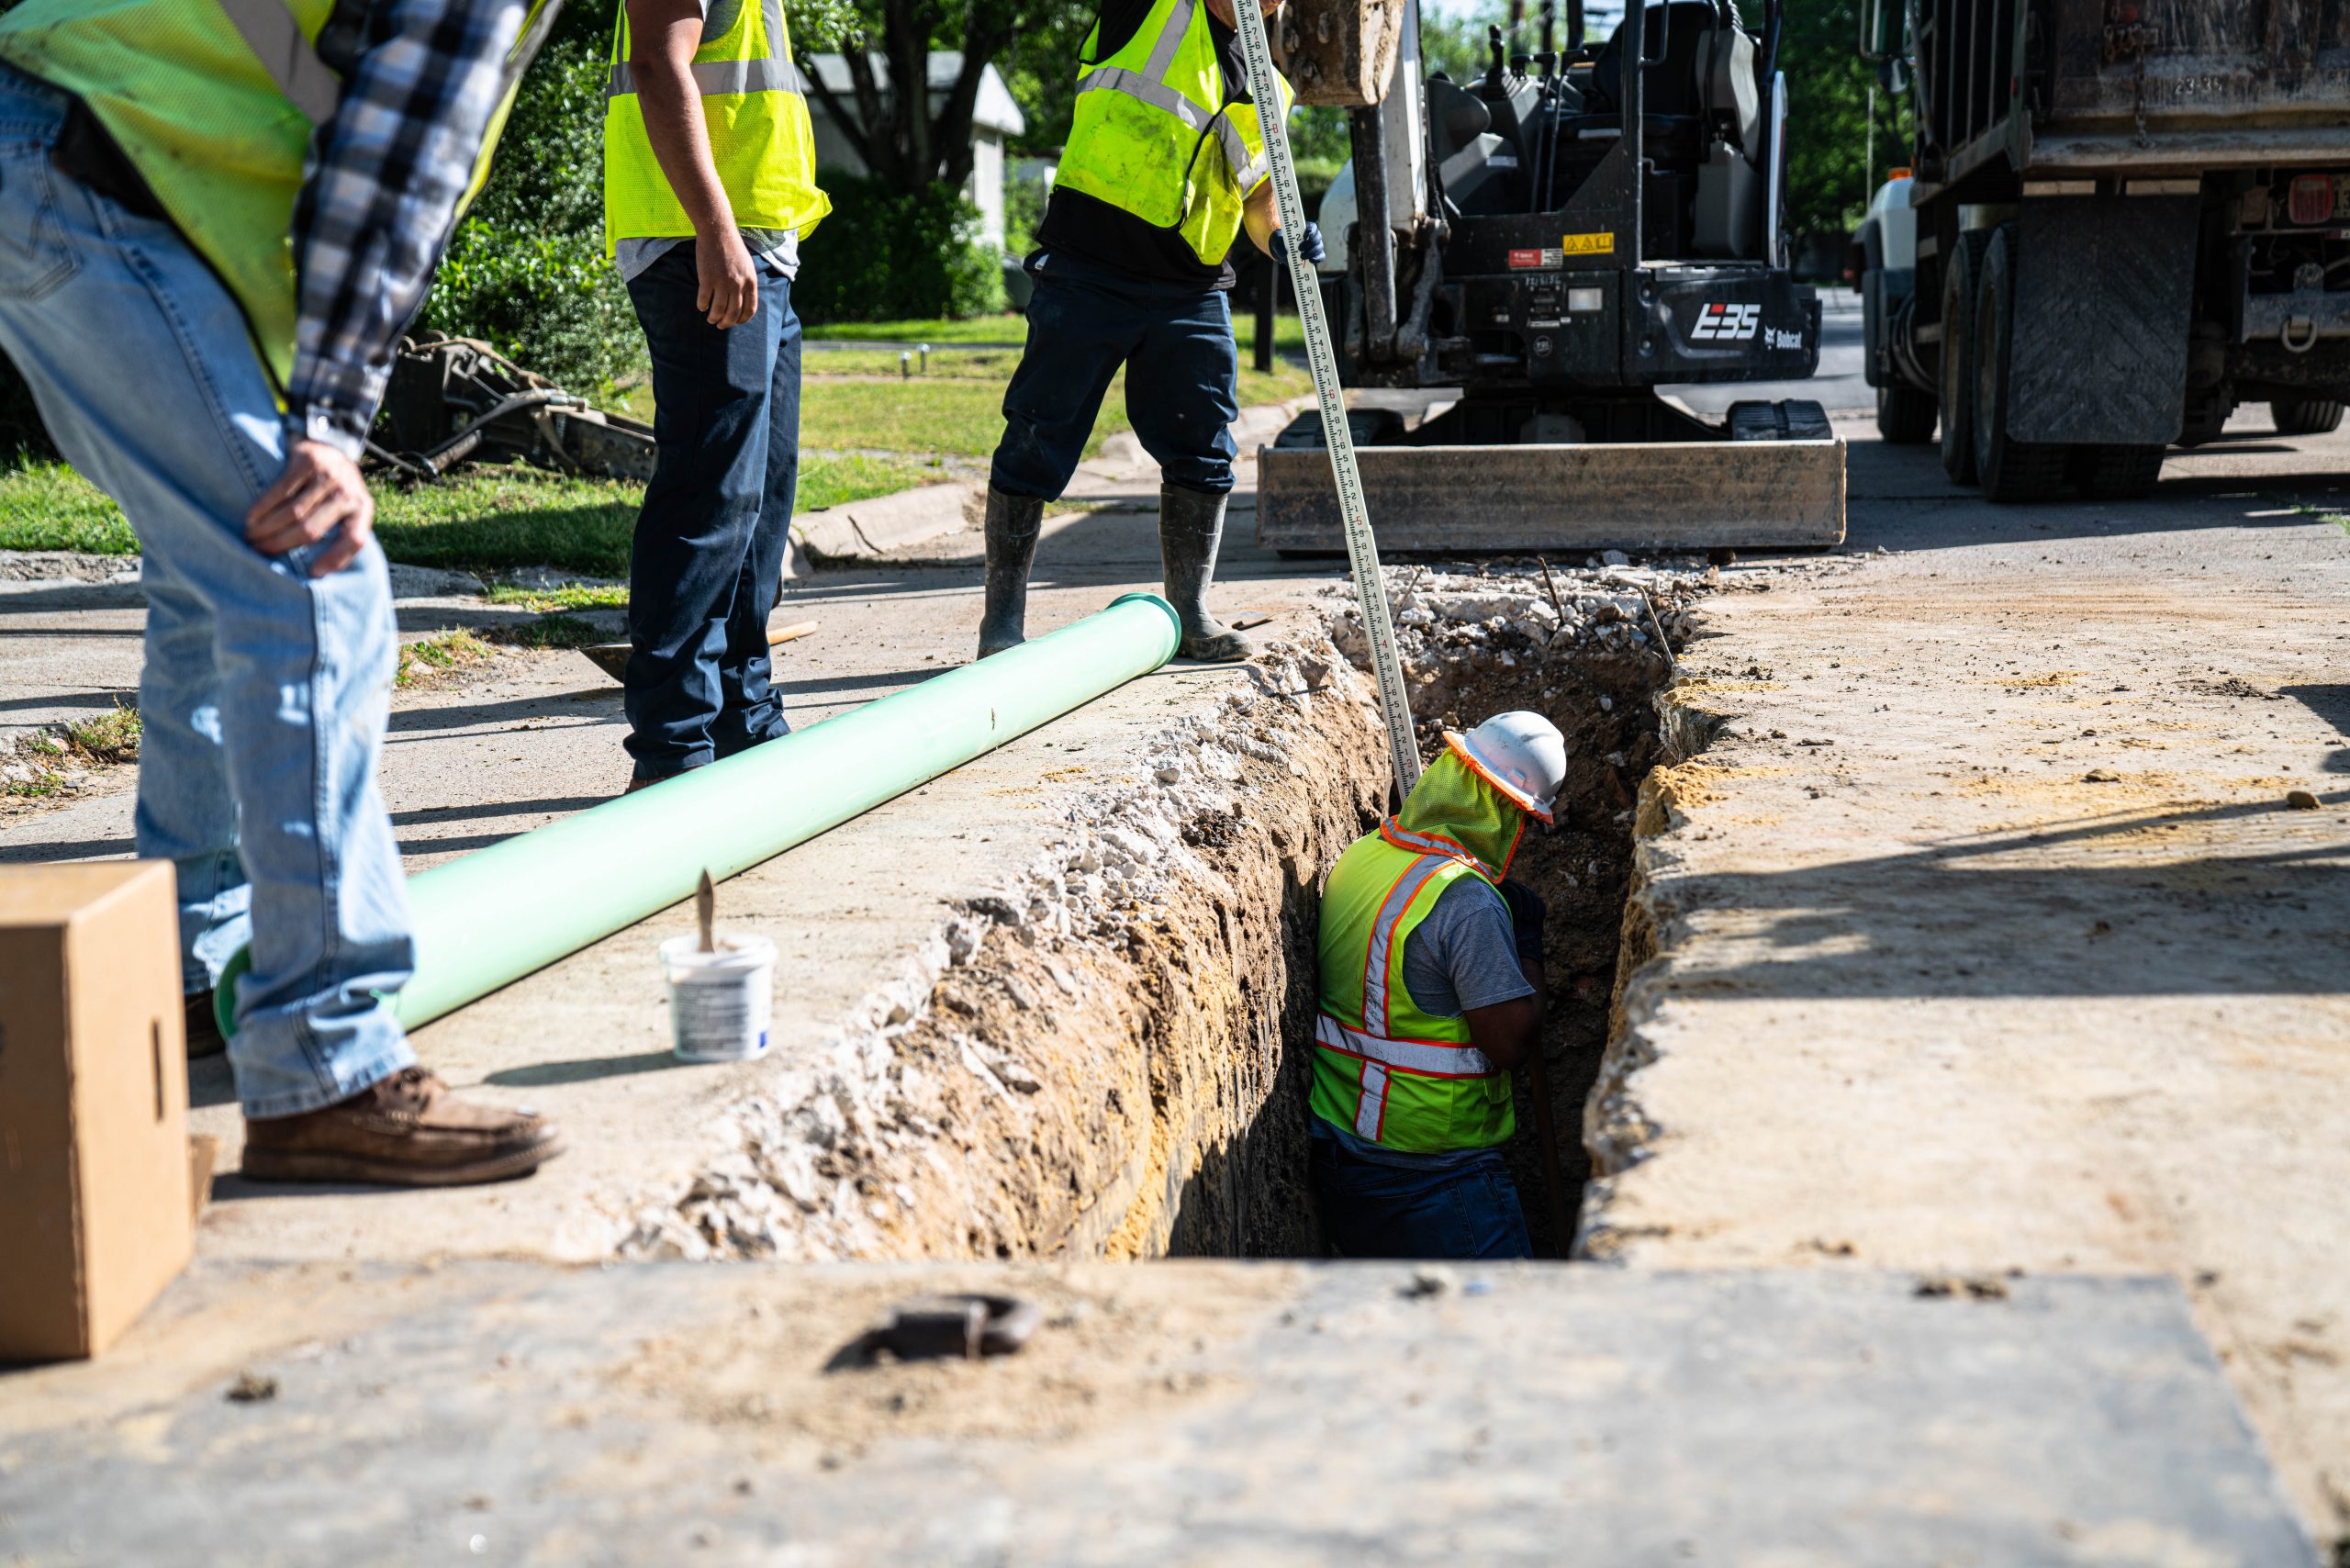 Wastewater workers installing a new sewer pipe.